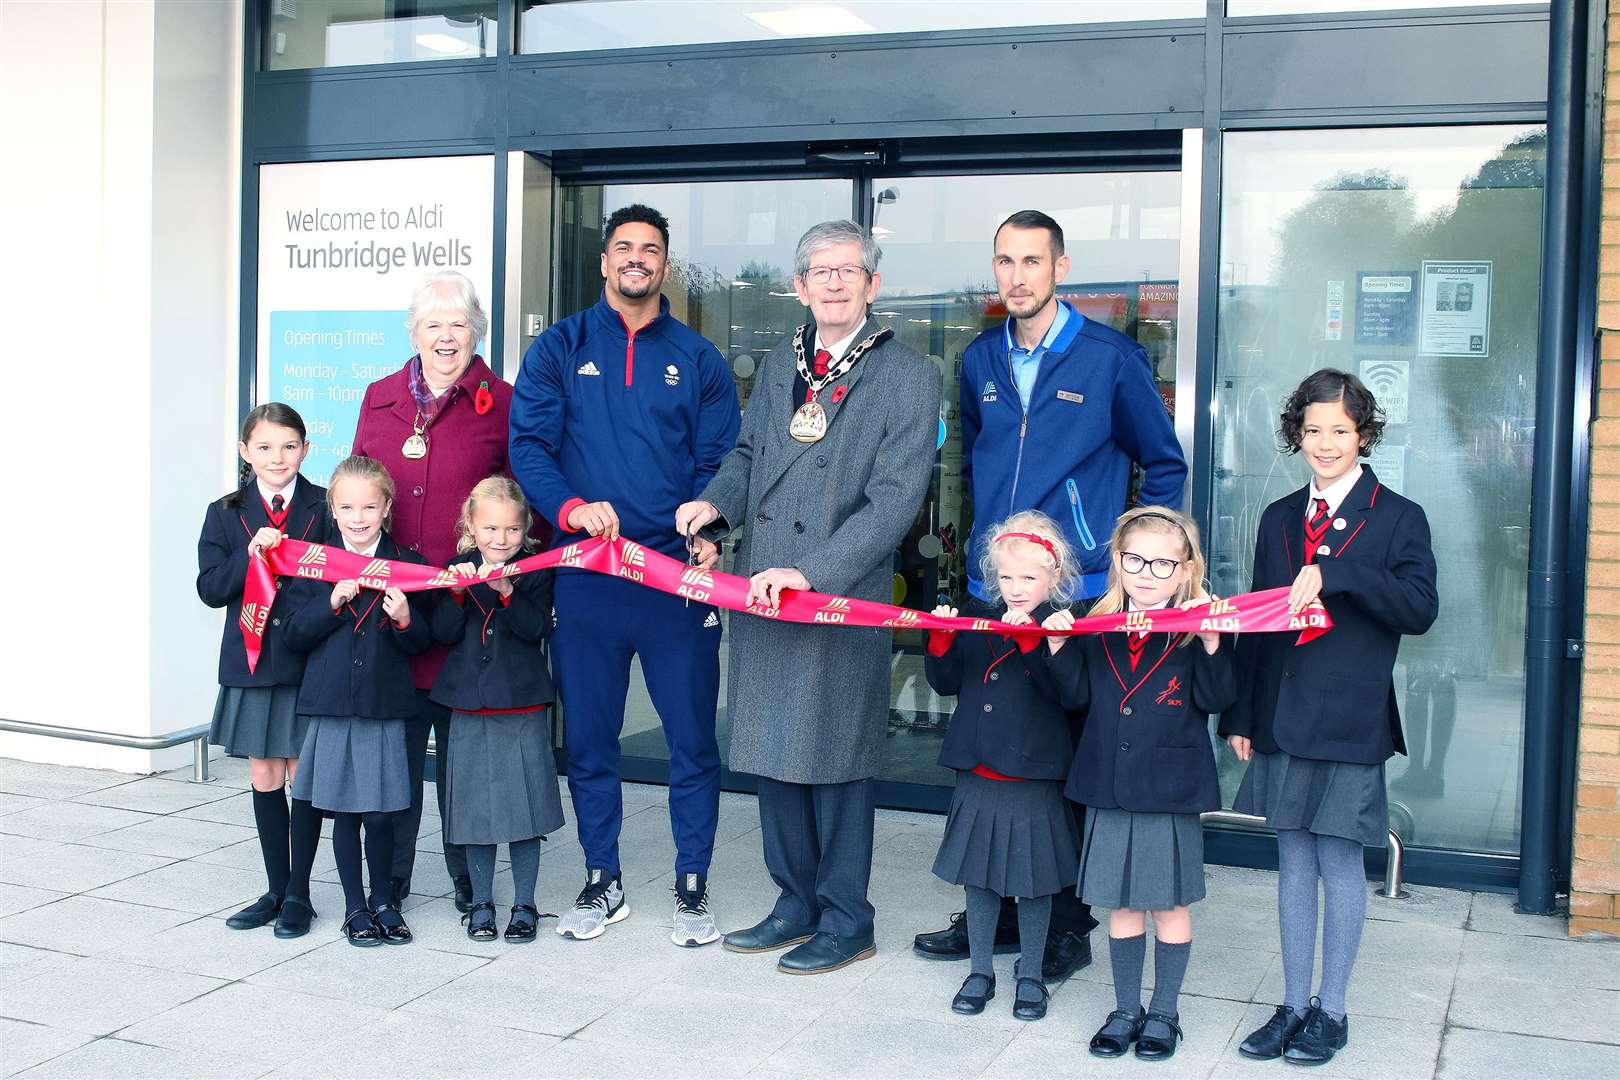 Tunbridge Wells got its own branch in October 2019, with the launch attended by GB athlete Anthony Ogogo and the town's mayor